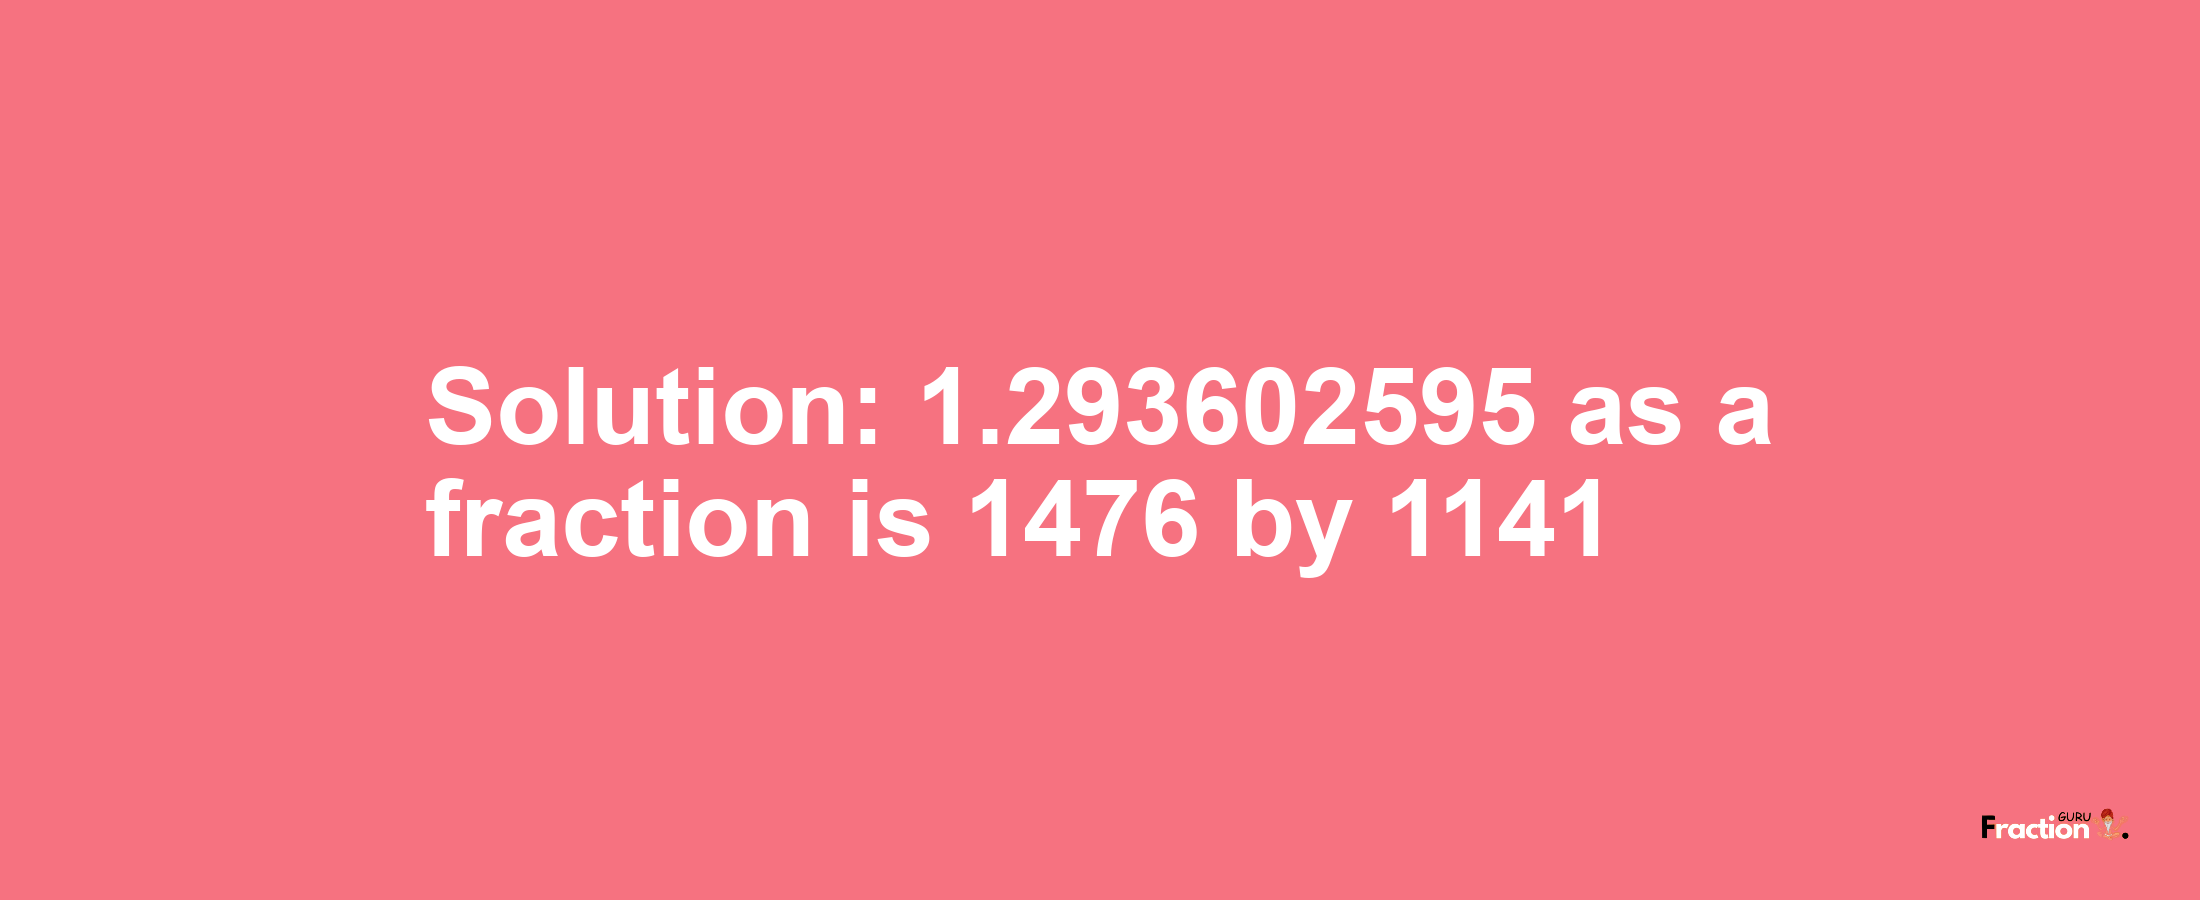 Solution:1.293602595 as a fraction is 1476/1141